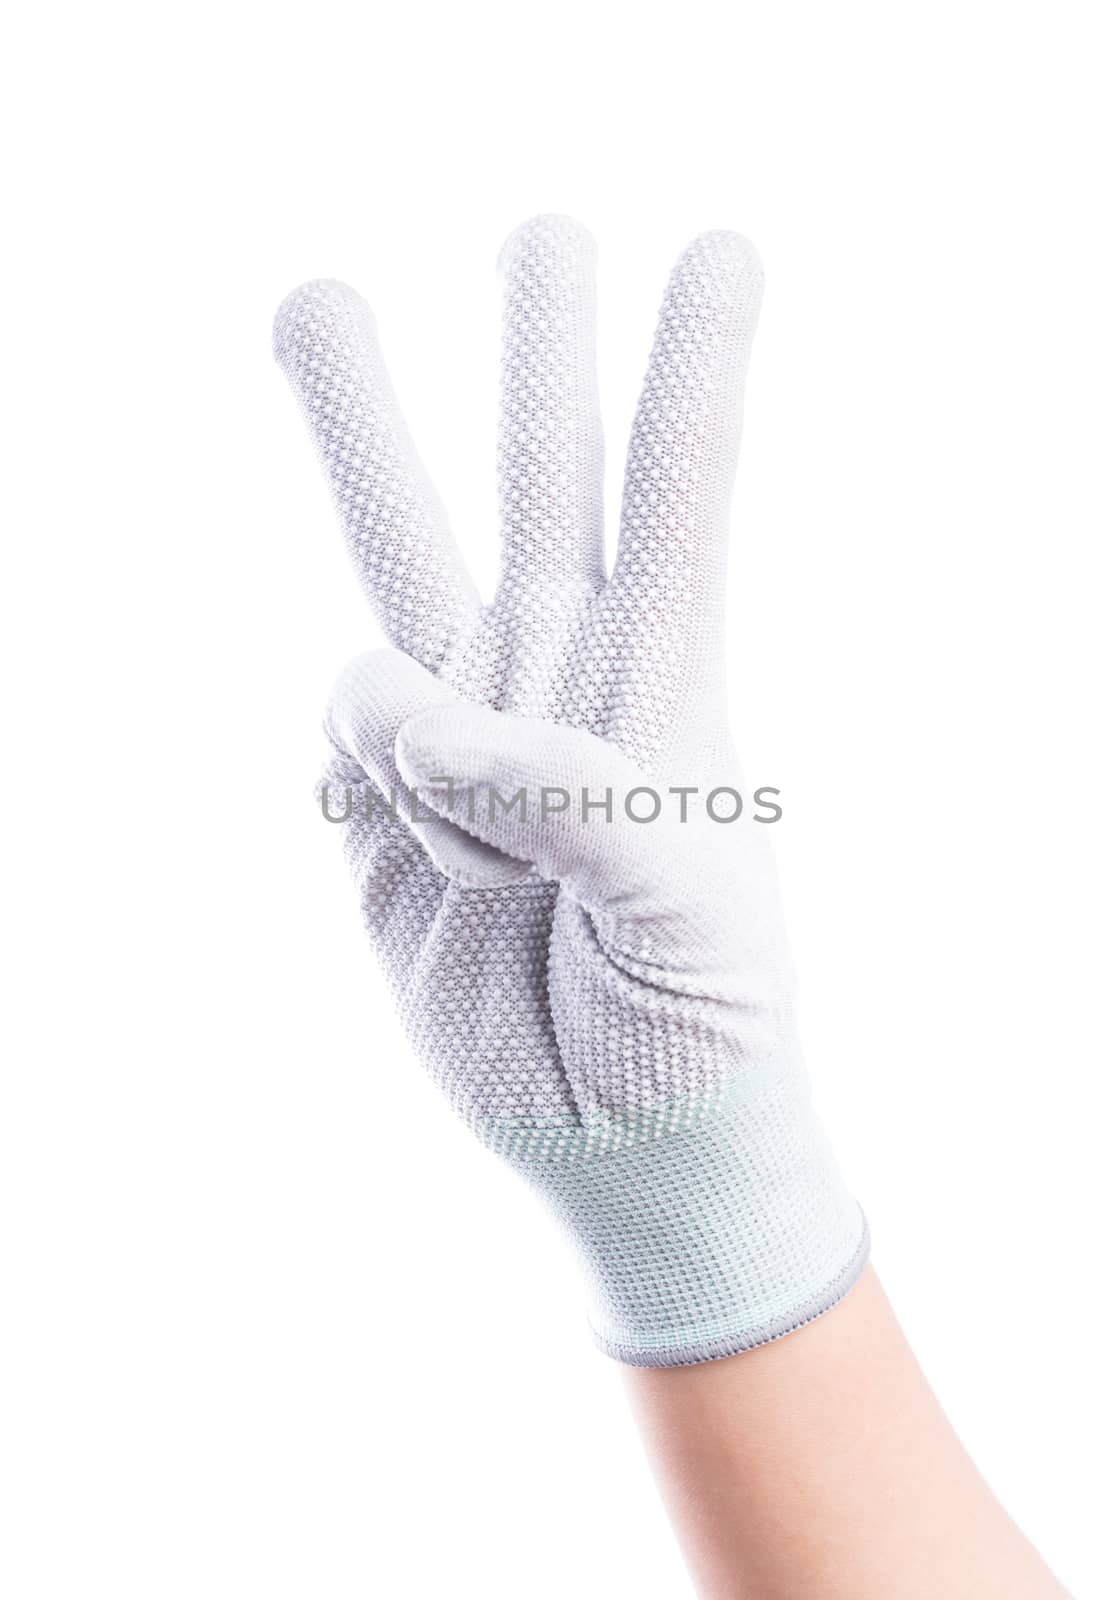 Show Hands three finger with cotton gloves by Sorapop